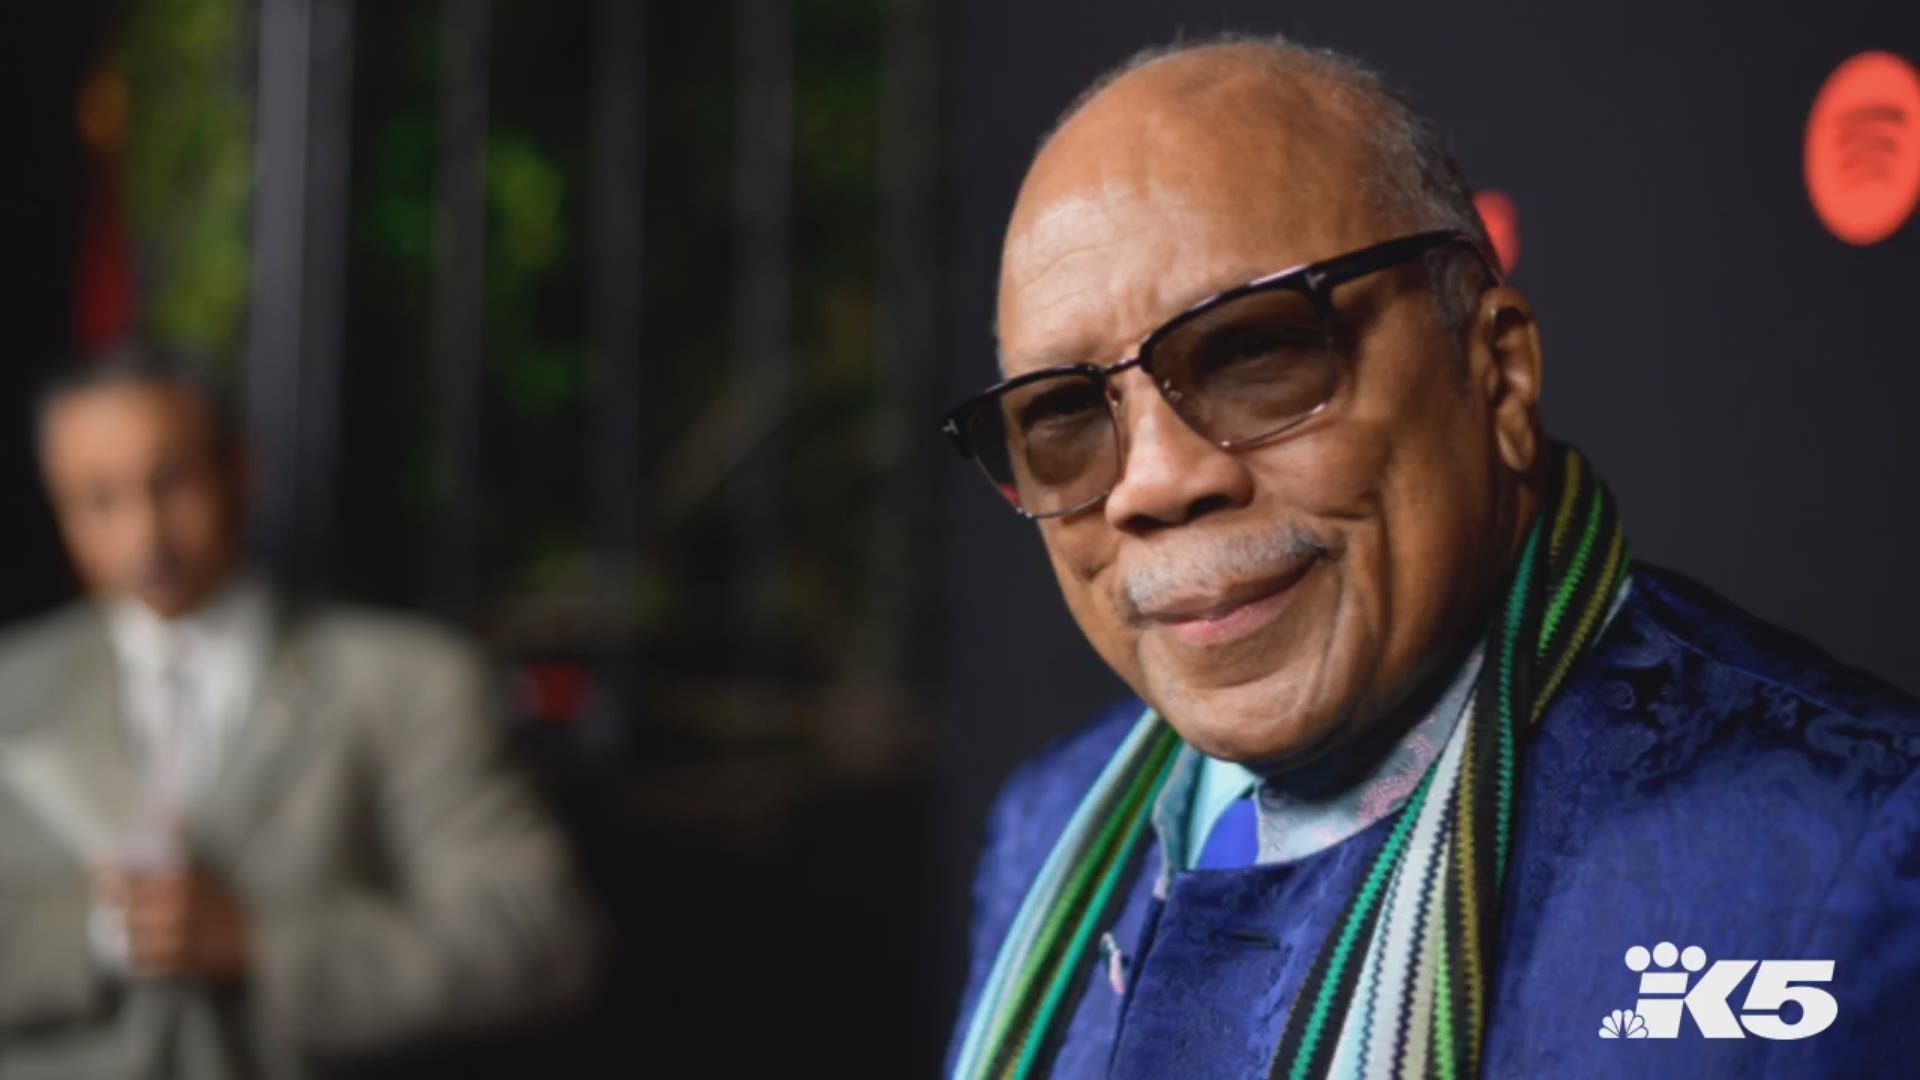 Photos of legendary music producer and Seattle native Quincy Jones. (Photos: Getty Images)